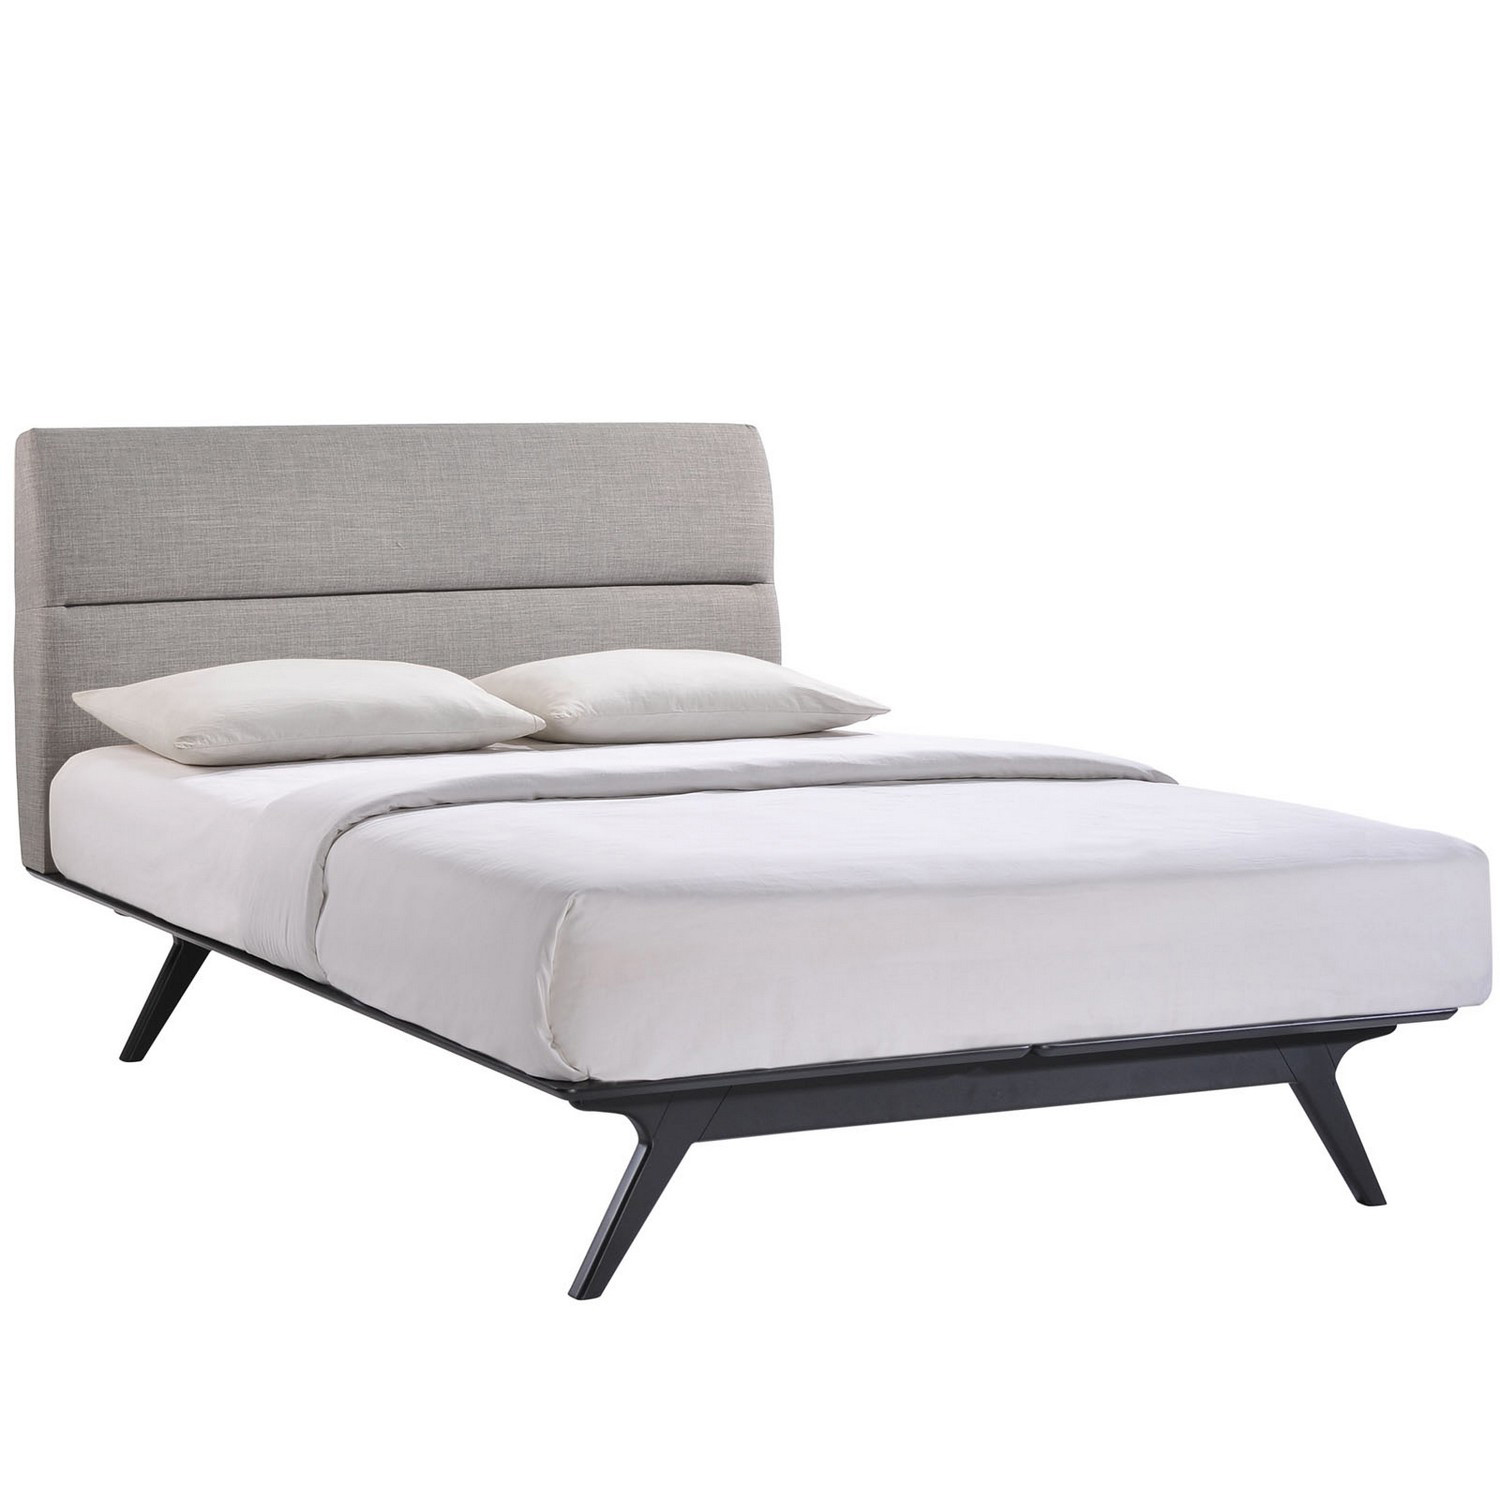 Modway Addison Queen Bed - Black Gray